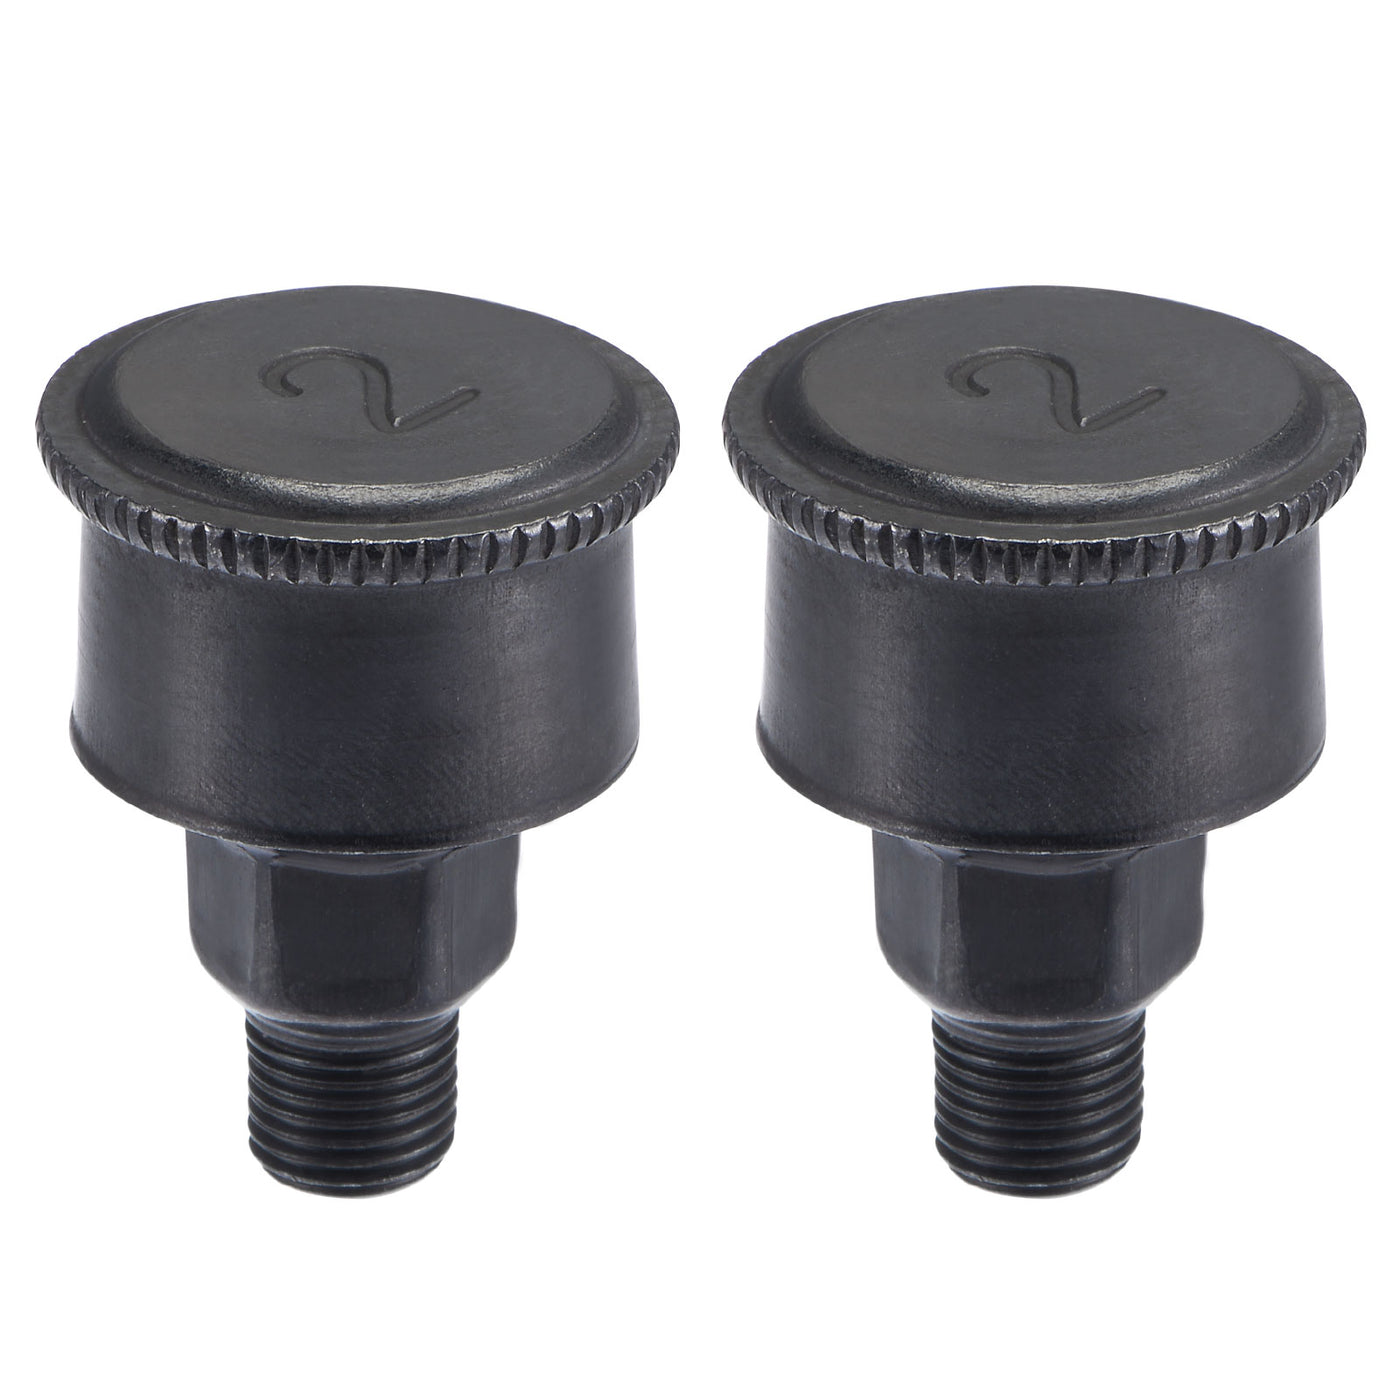 Uxcell Uxcell Machine Parts M10x1 Male Thread 3ml Grease Oil Cup Cap Carbon Steel Oiler Black 2Pcs